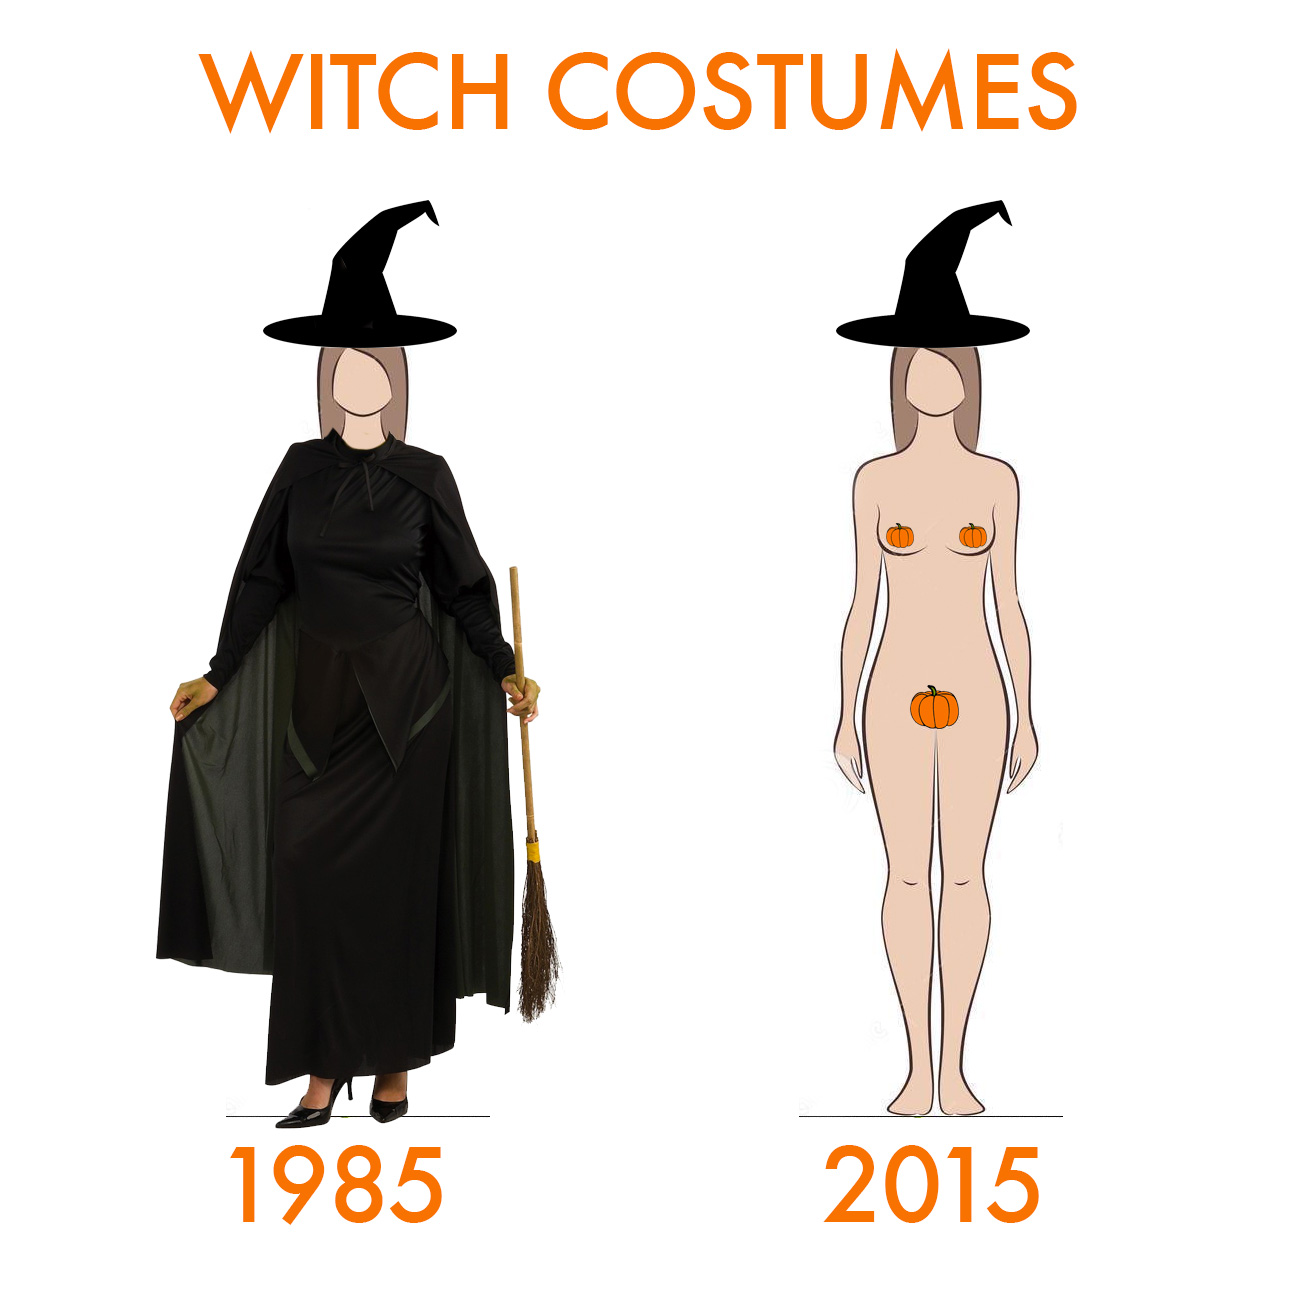 Witch Costume - Then and Now.